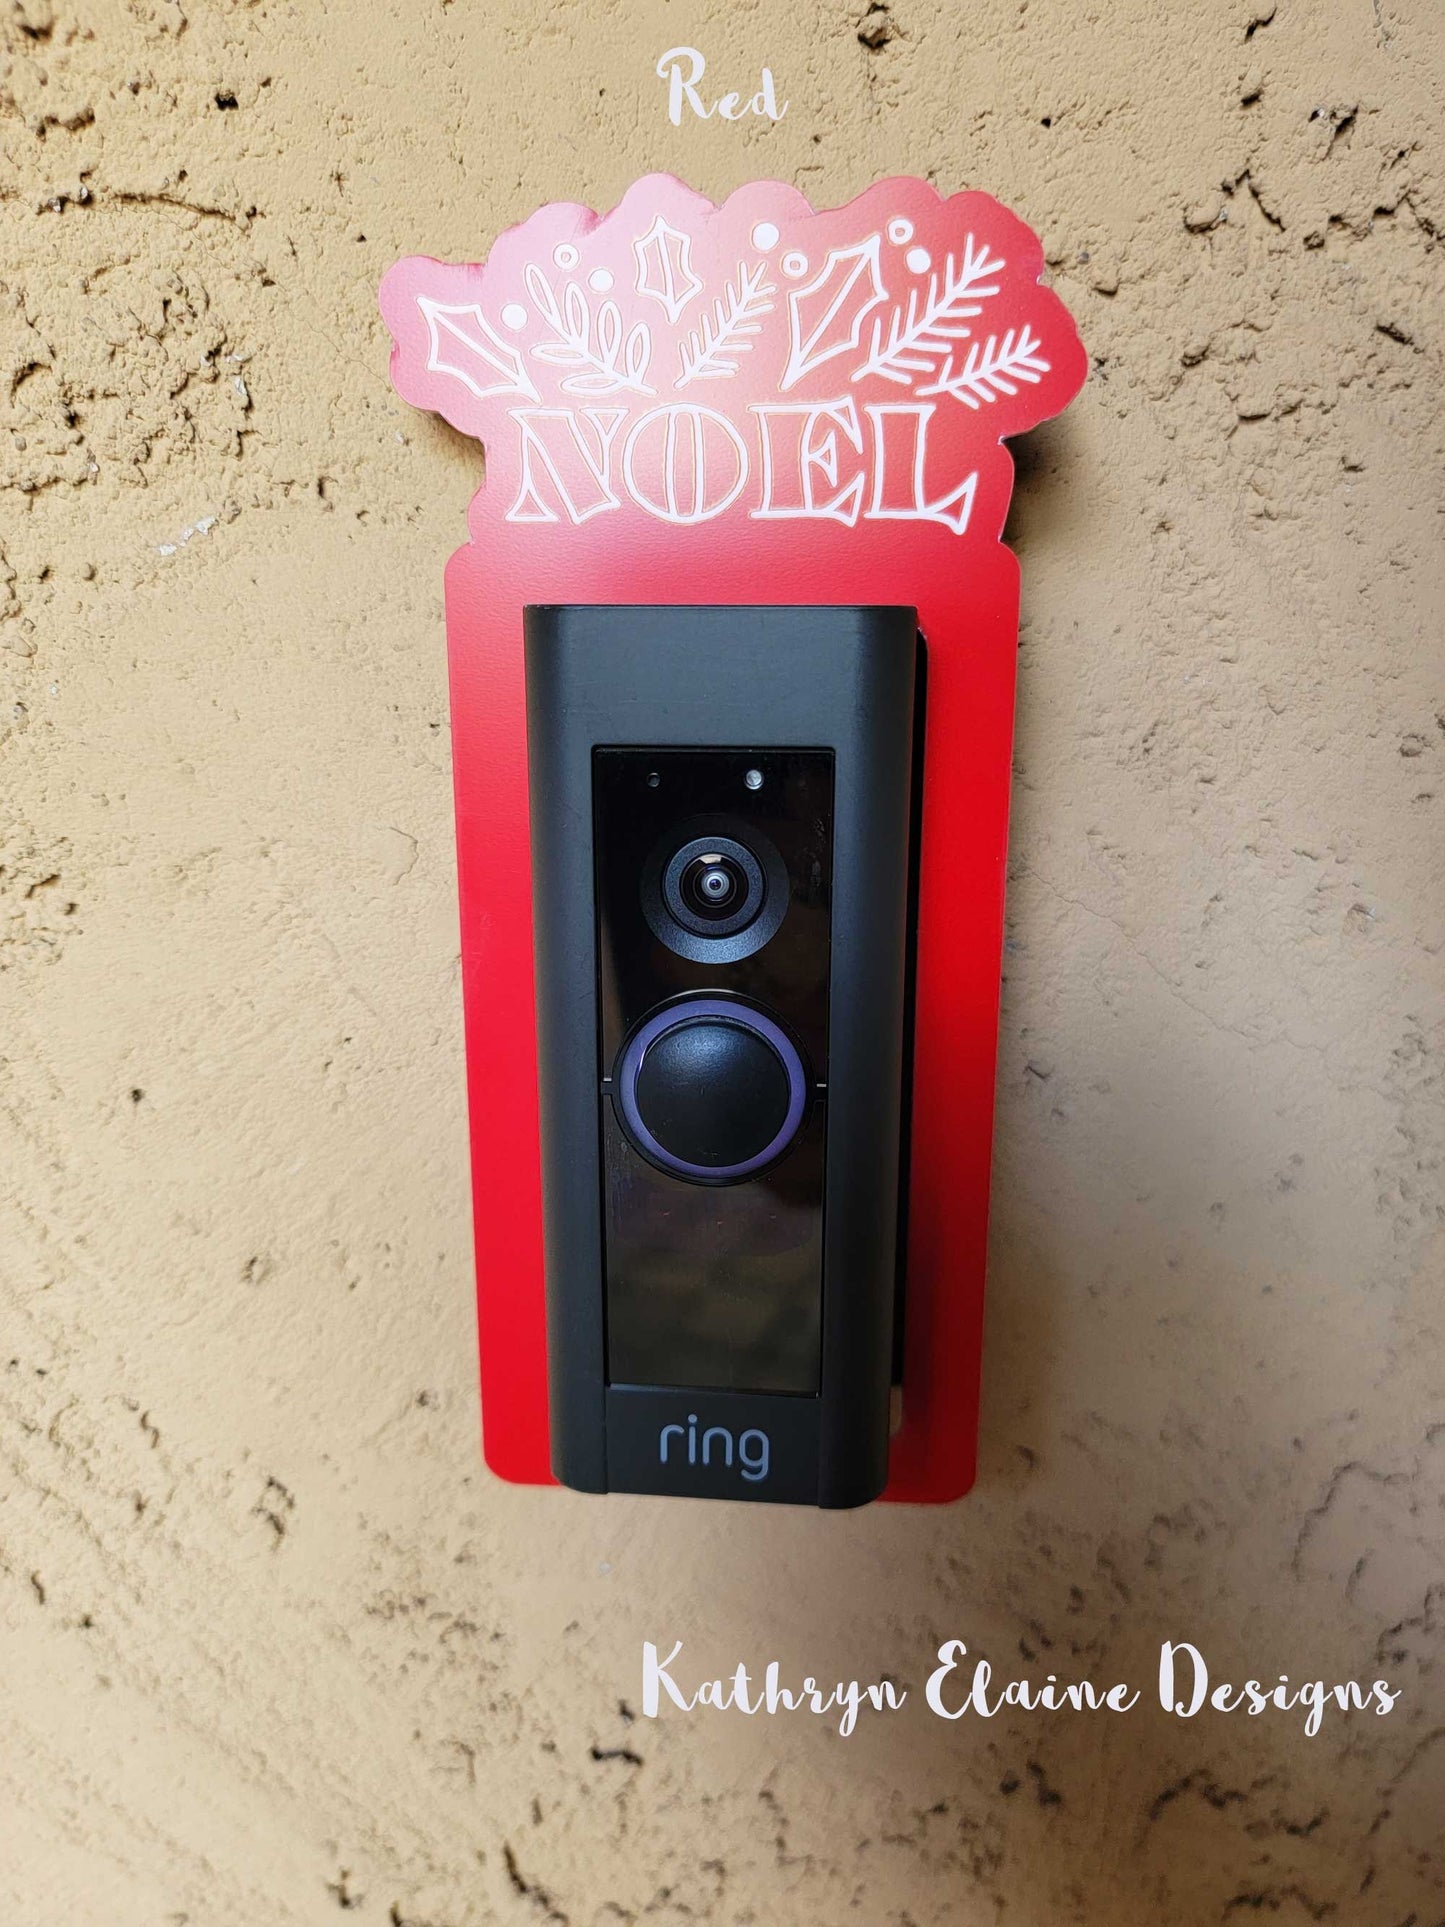 Red laminate doorbell surround with white lettering saying Noel and holly, leaf design around ring doorbell on tan background.